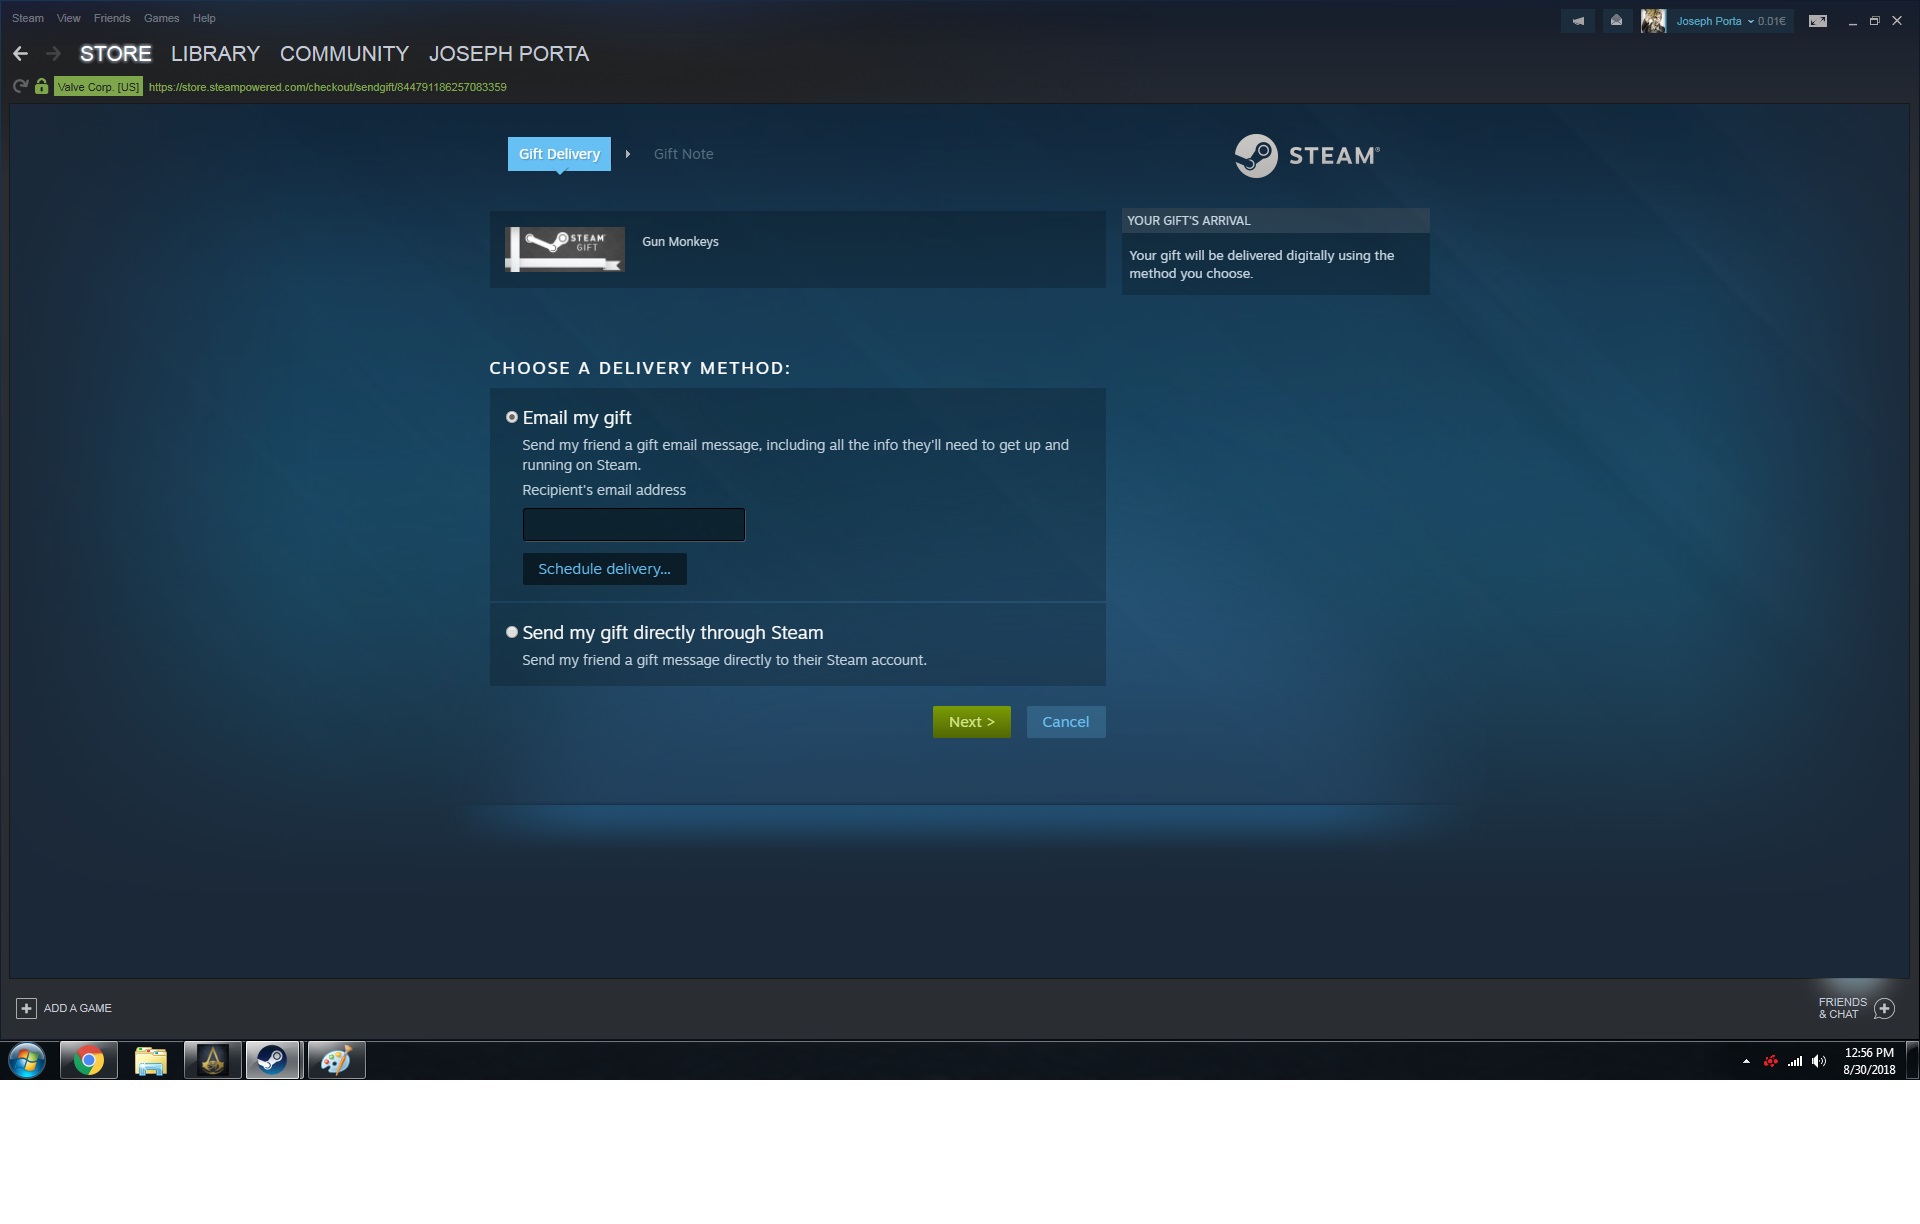 Send message to steam фото 4